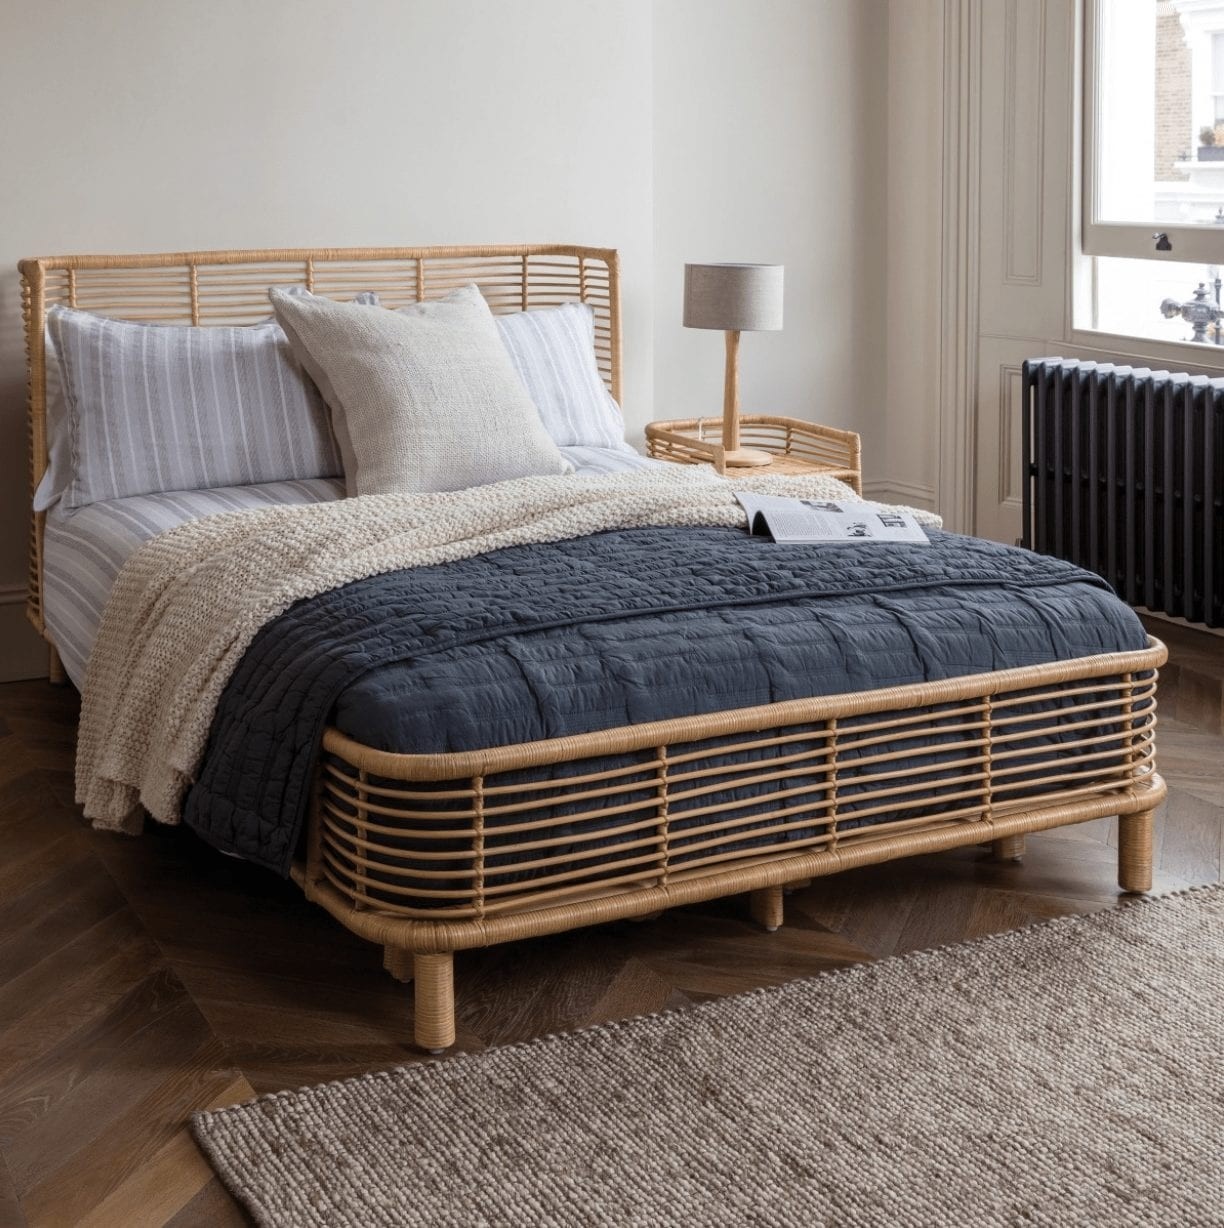 Buying guide rattan beds and headboards interior design